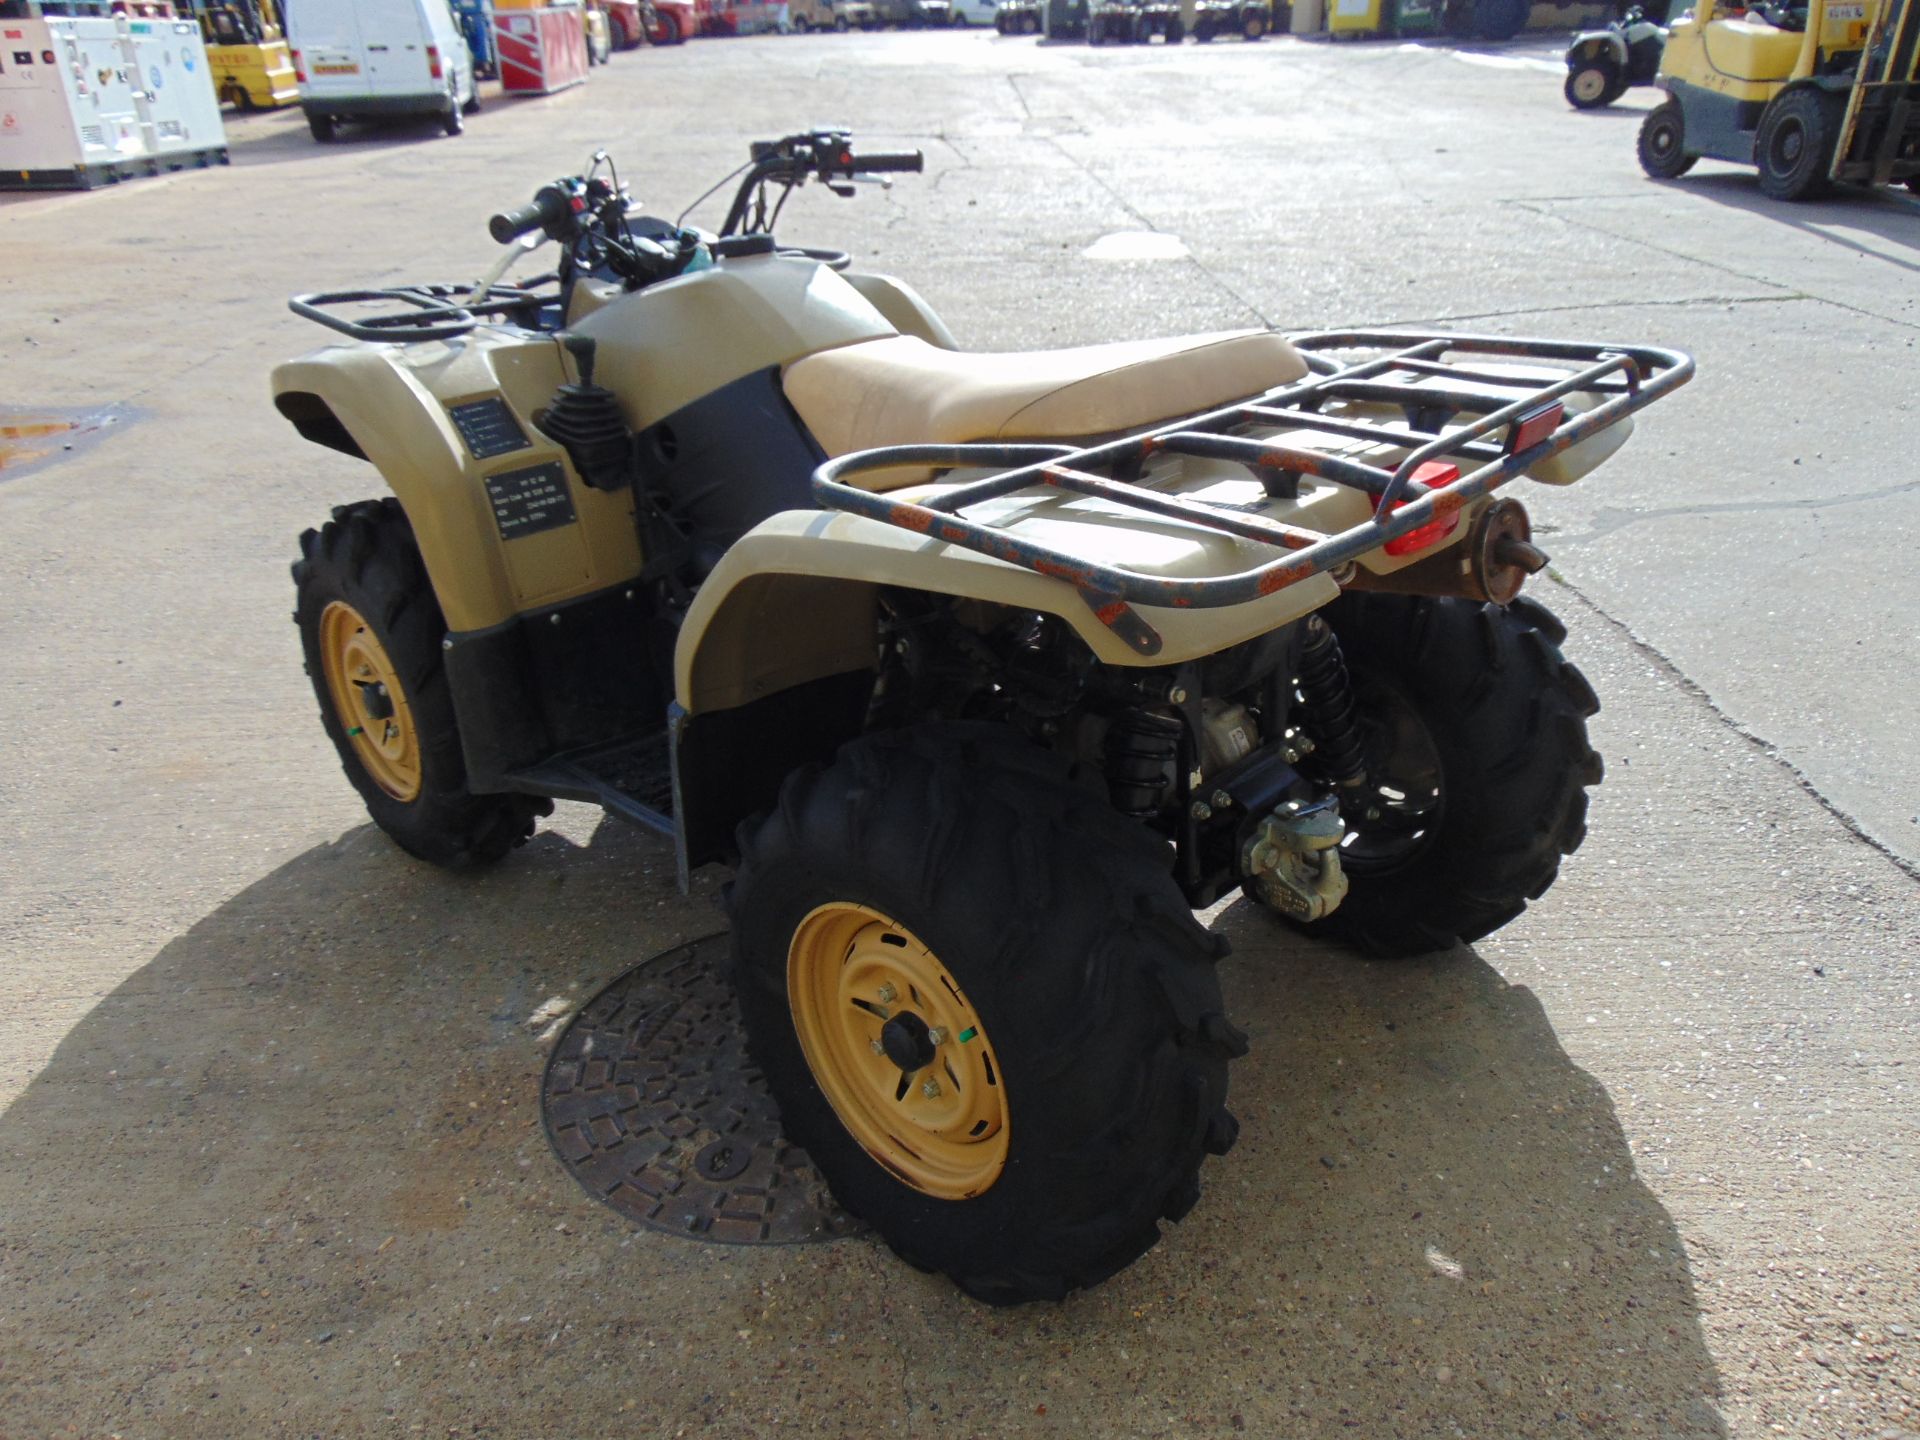 Military Specification Yamaha Grizzly 450 4 x 4 ATV Quad Bike - Image 8 of 14